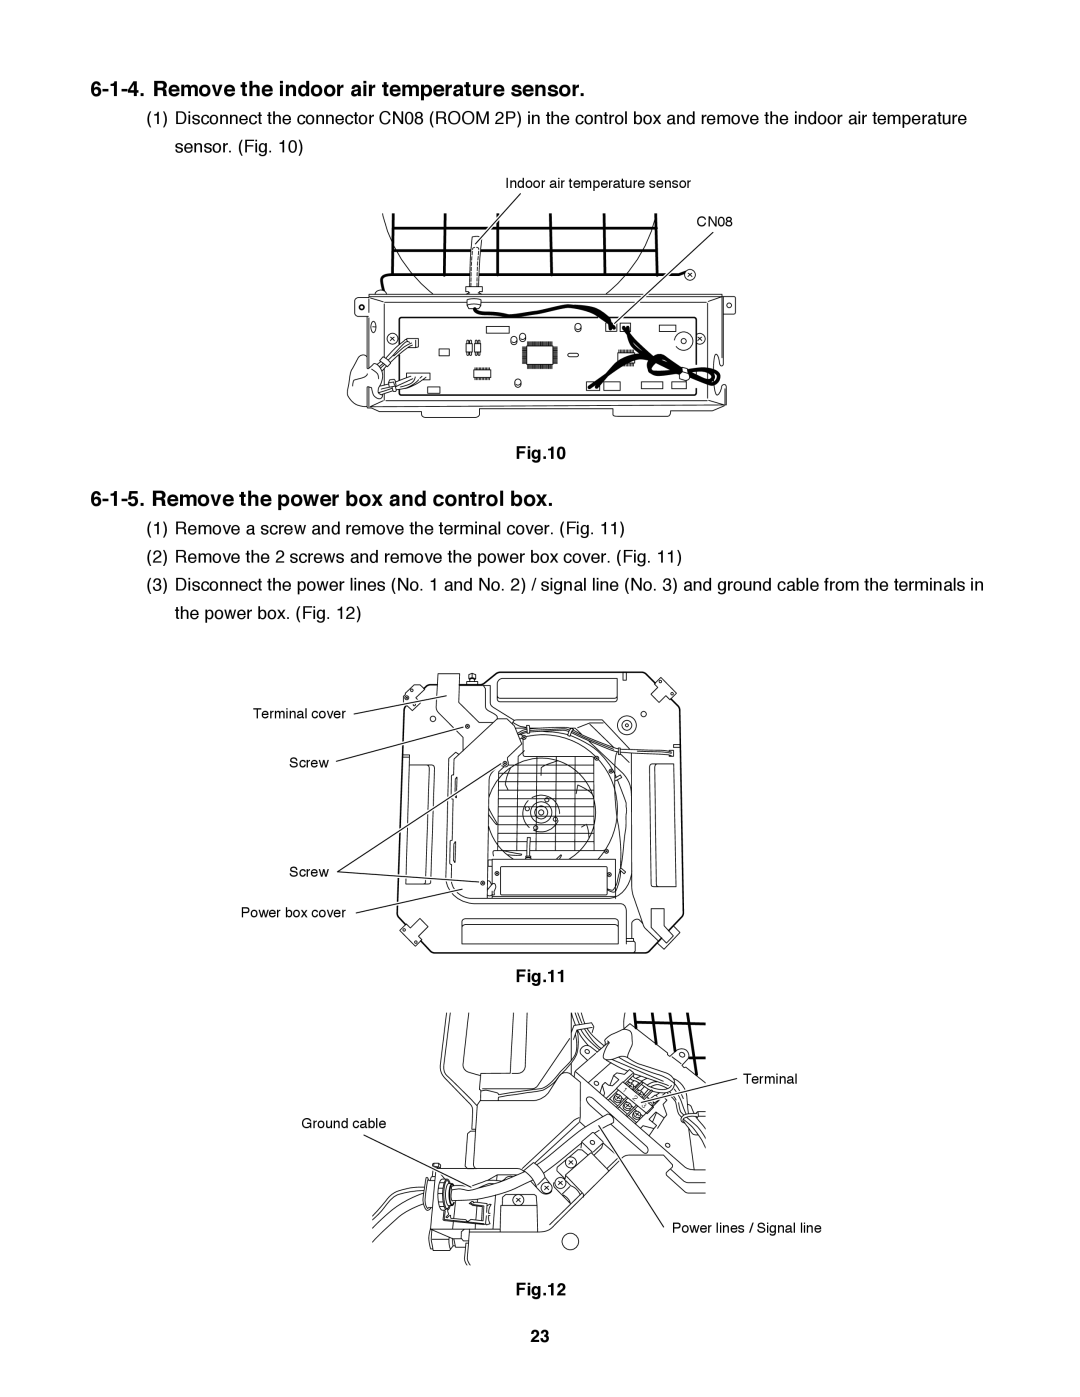 Sanyo XMHS1272, XMHS0972 service manual Remove the indoor air temperature sensor, Remove the power box and control box 